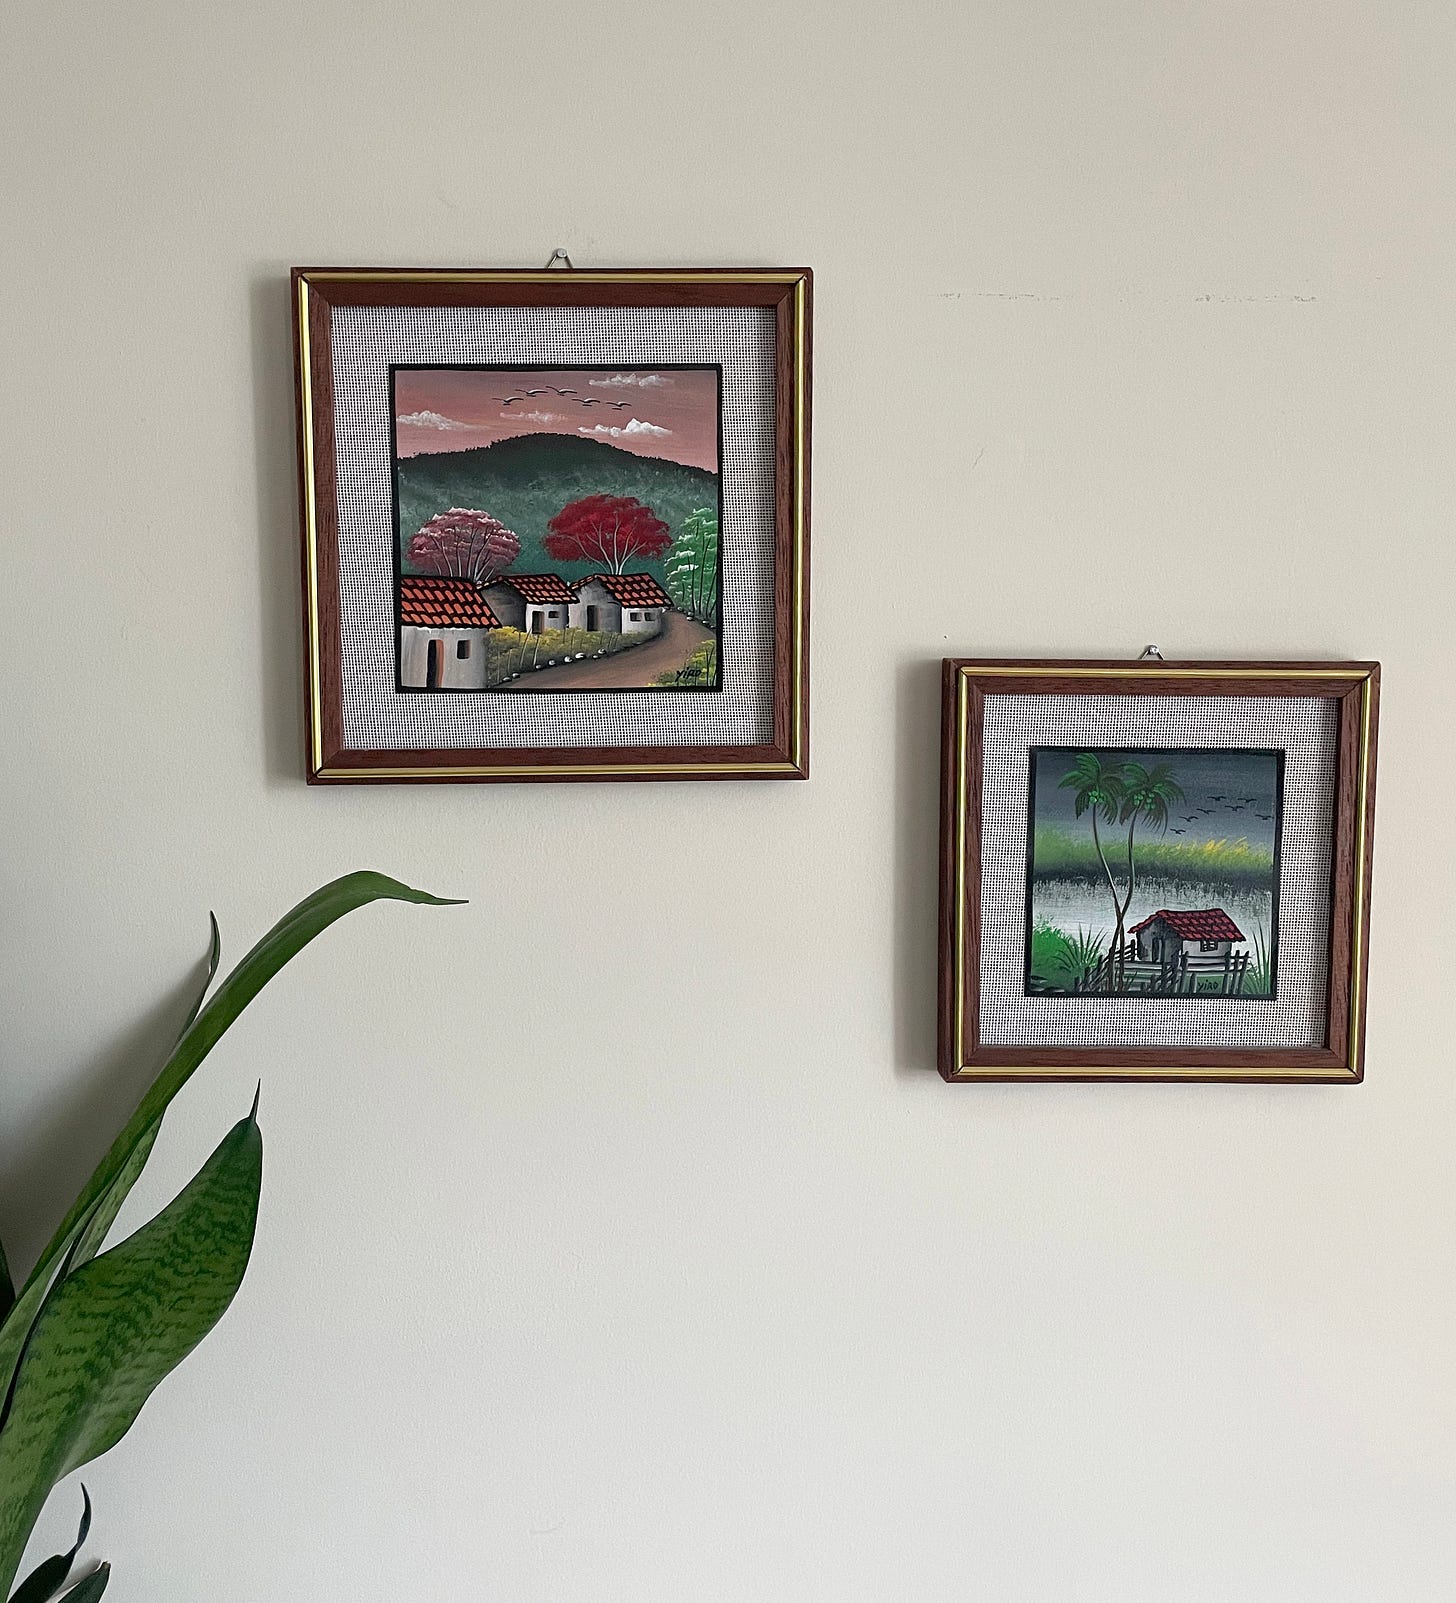 Two paintings depicting the countryside in El Salvador (houses, water, mountains).